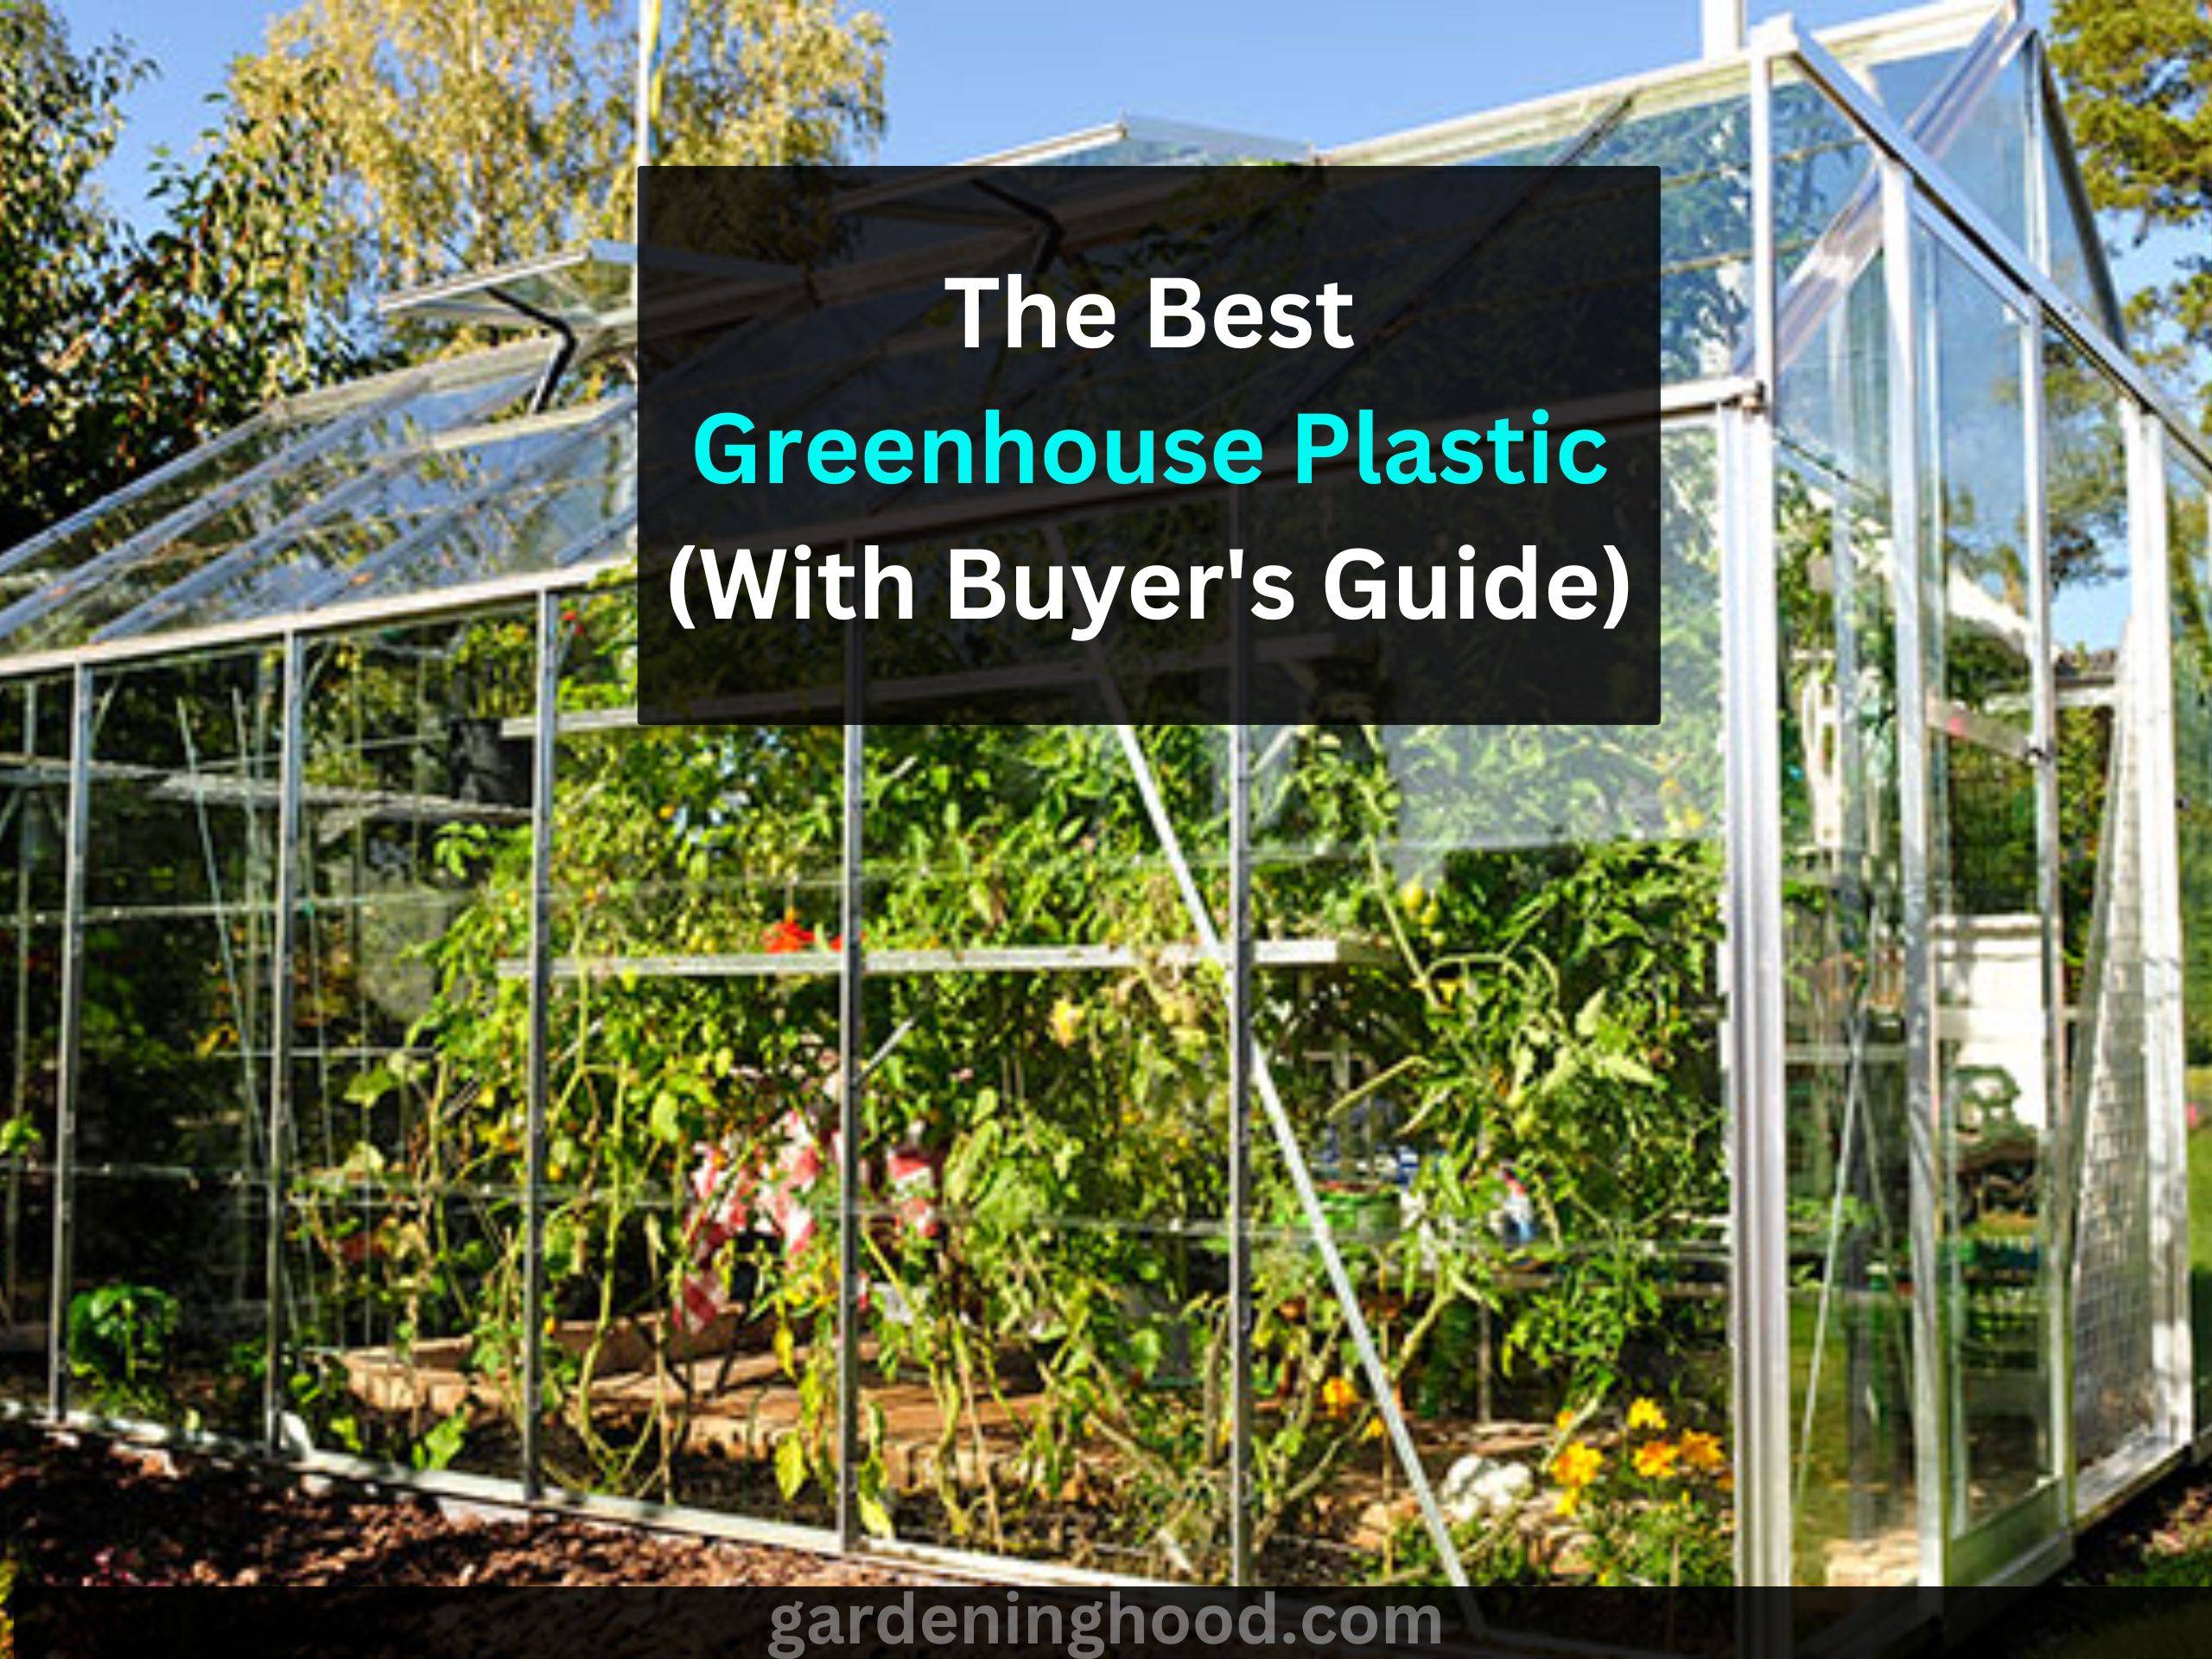 The Best Greenhouse Plastic (With Buyer's Guide)